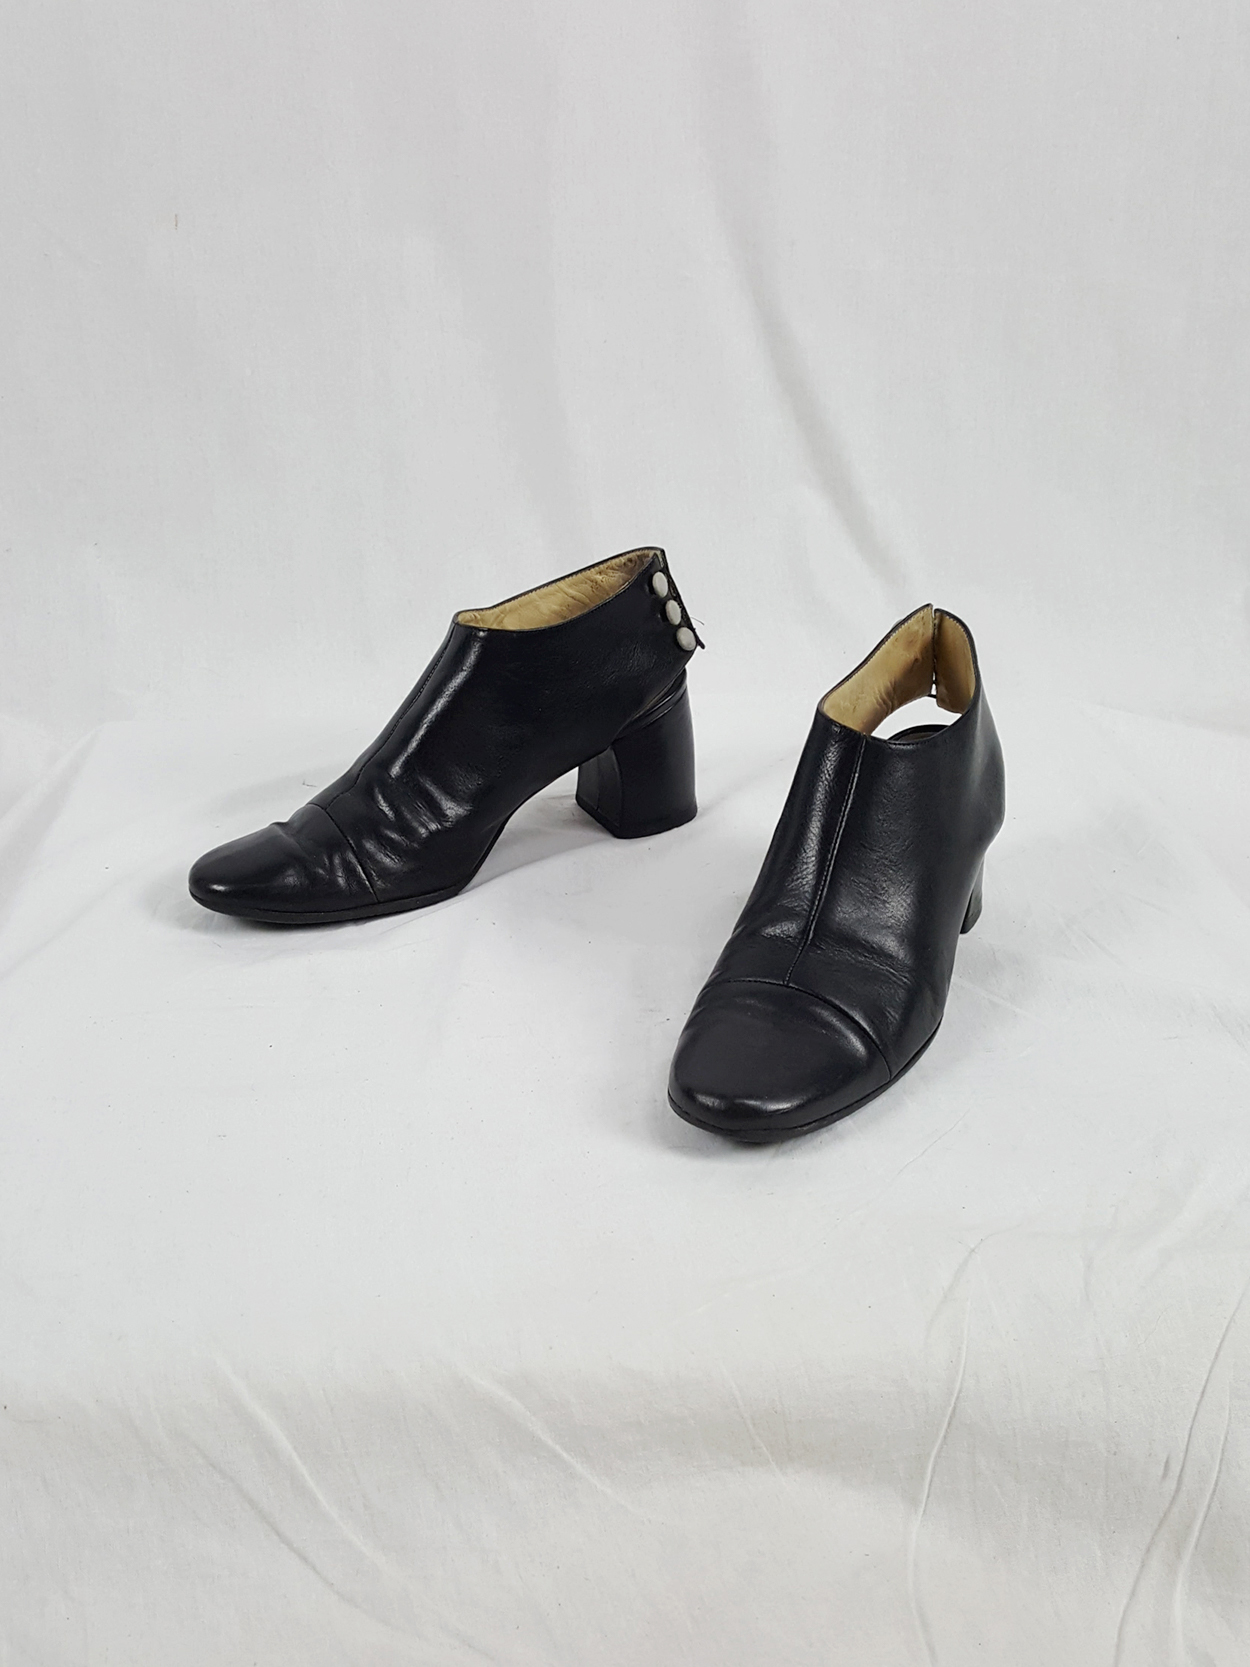 Ann Demeulemeester black pumps with cut out and banana heel (39) — 90's ...